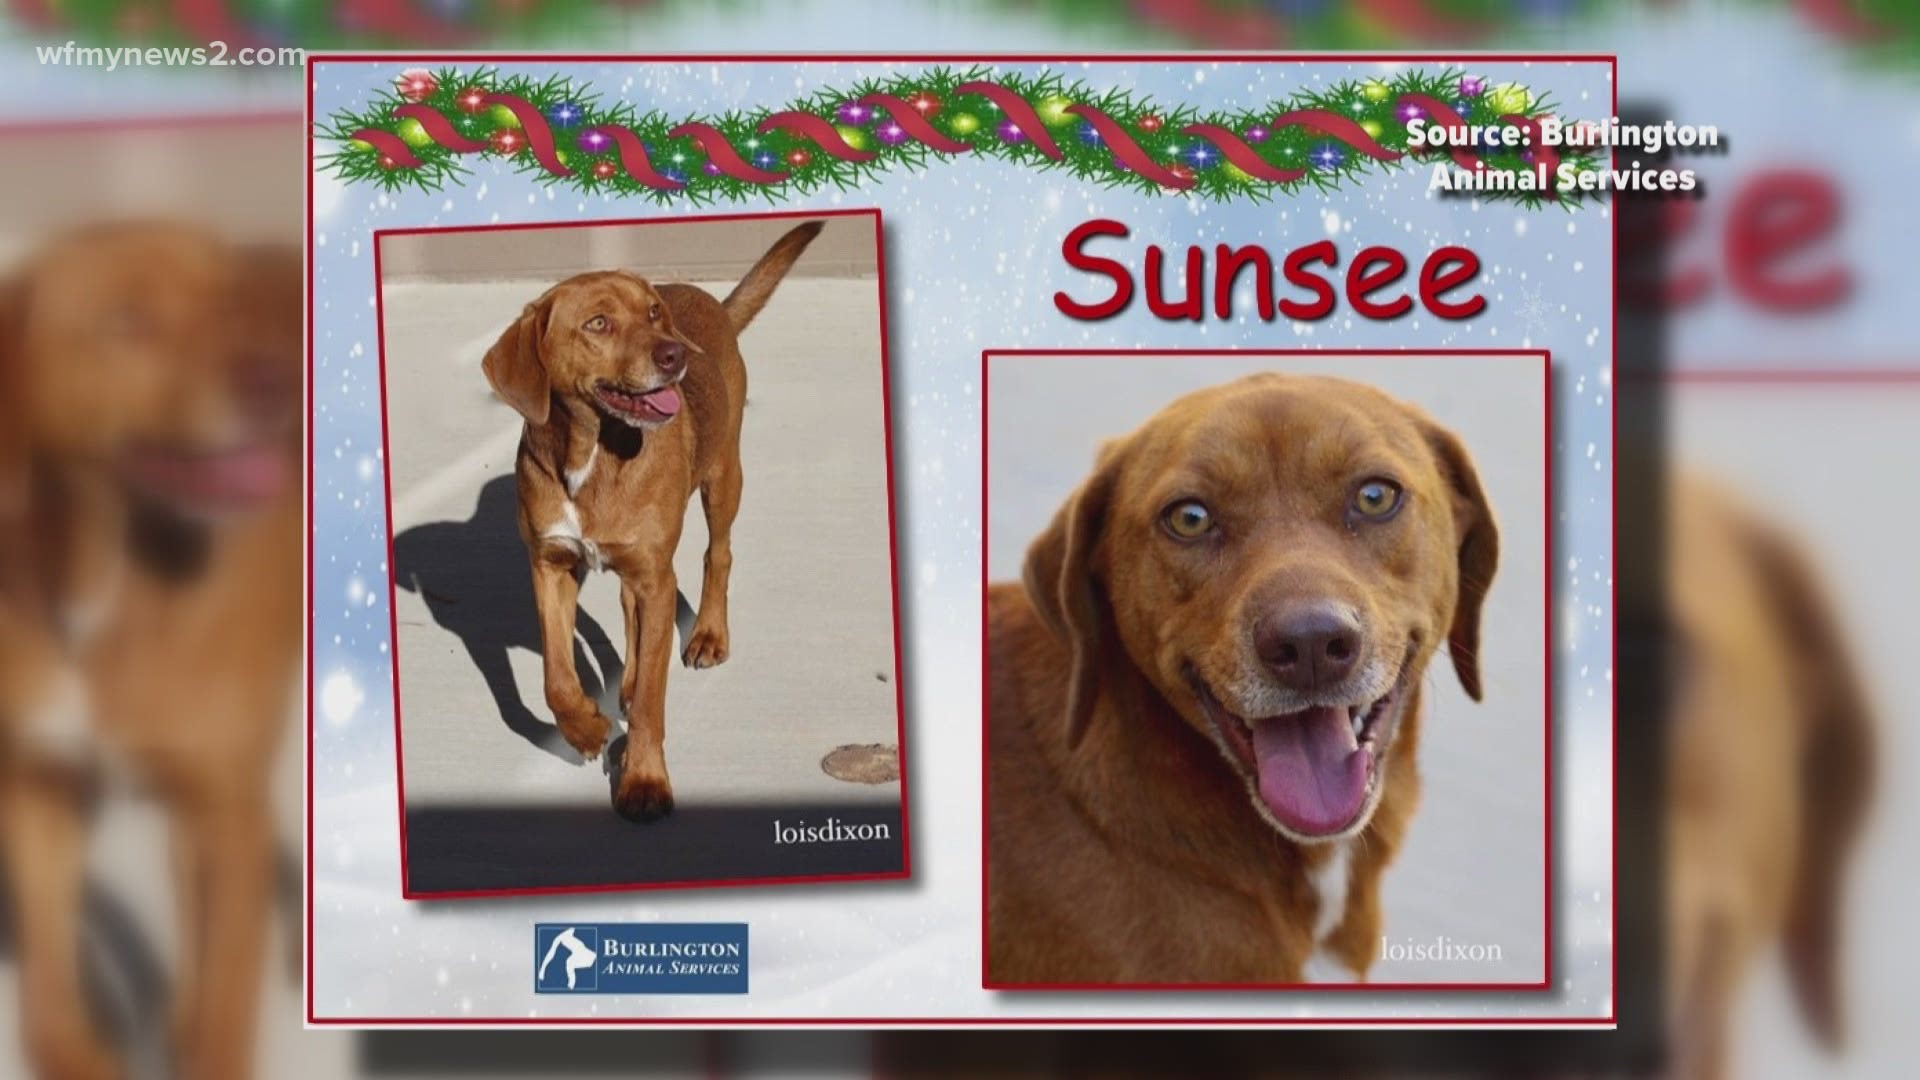 Bringing lots of sunsee and light to your life this holiday season!